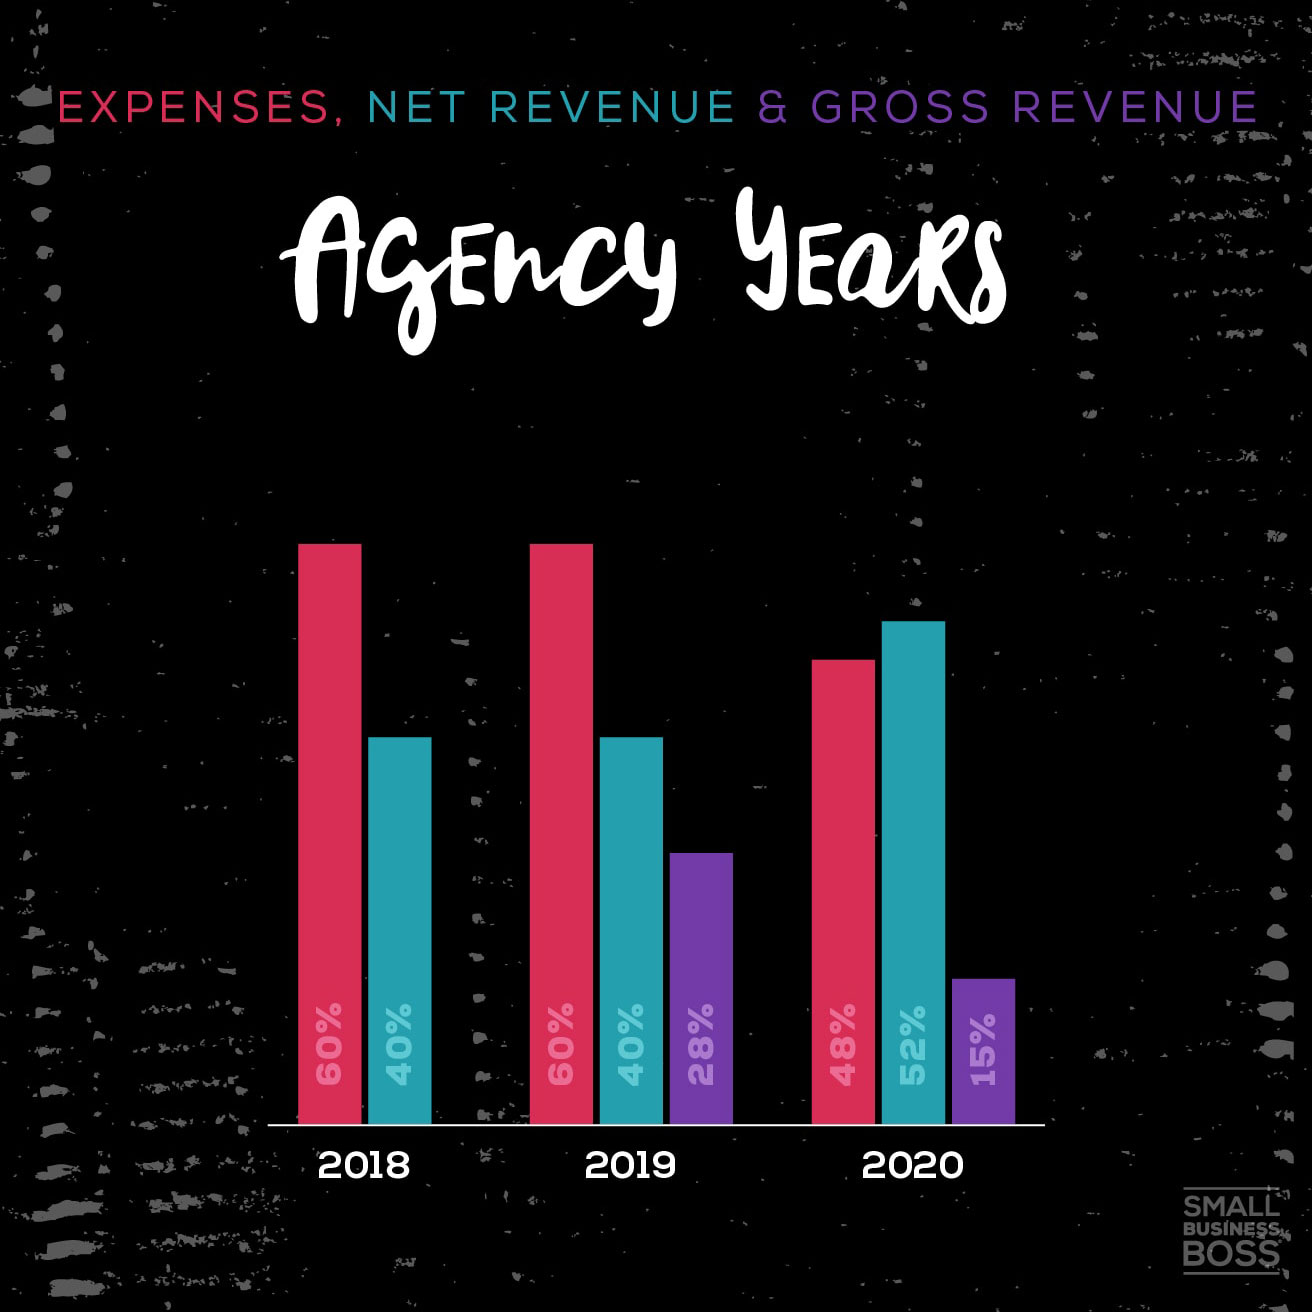 chart depicting expenses over the years